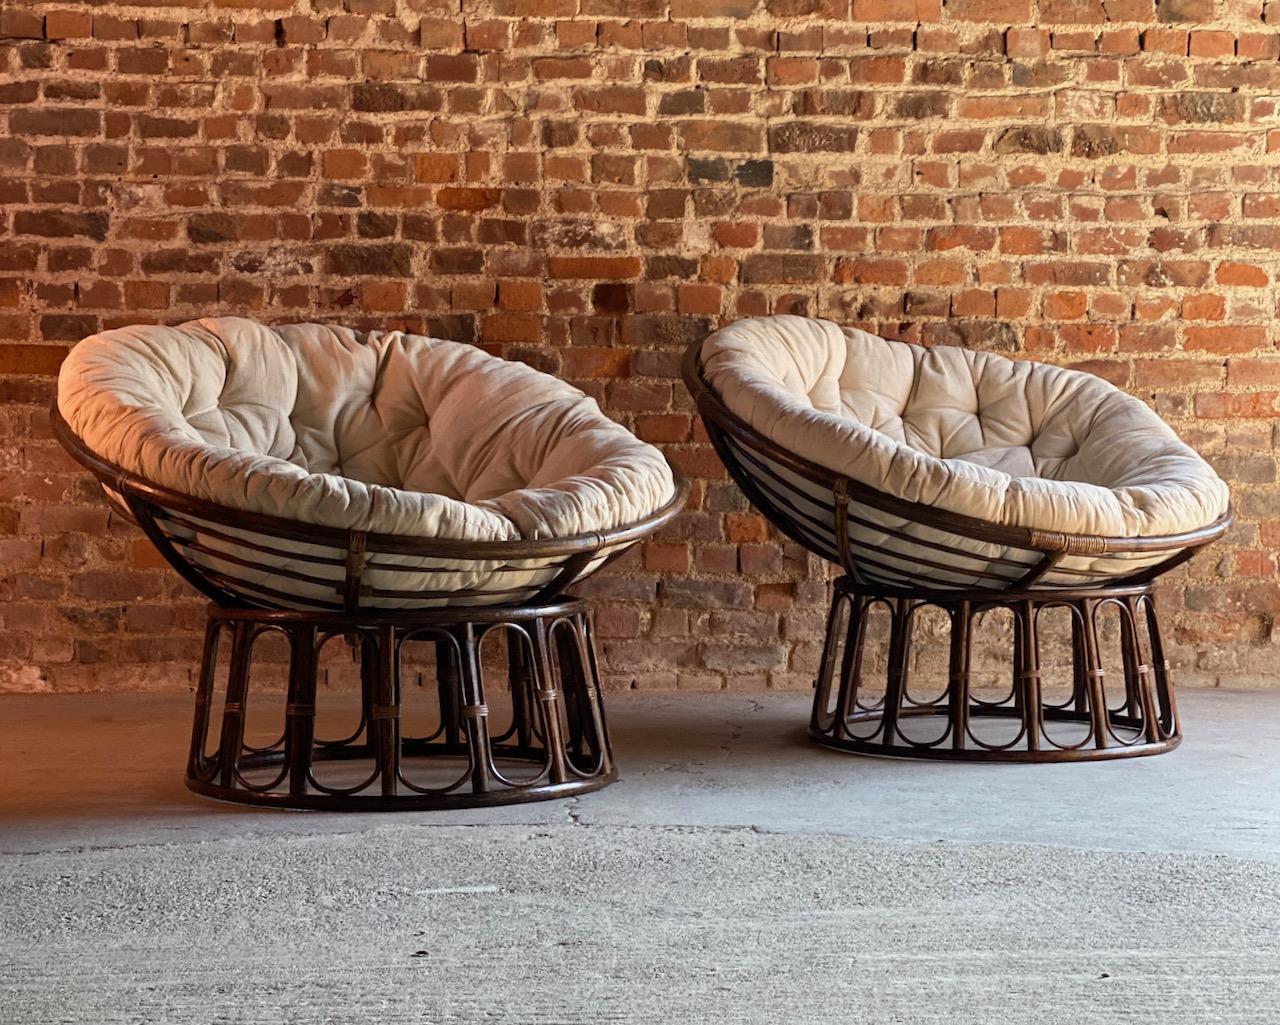 Midcentury French Papasan lounge chairs, circa 1970

A stunning pair of large midcentury French Papasan rattan and bamboo lounge chairs, France, circa 1970, these cultural icons from the swinging 1960s have never really fallen out of style – the